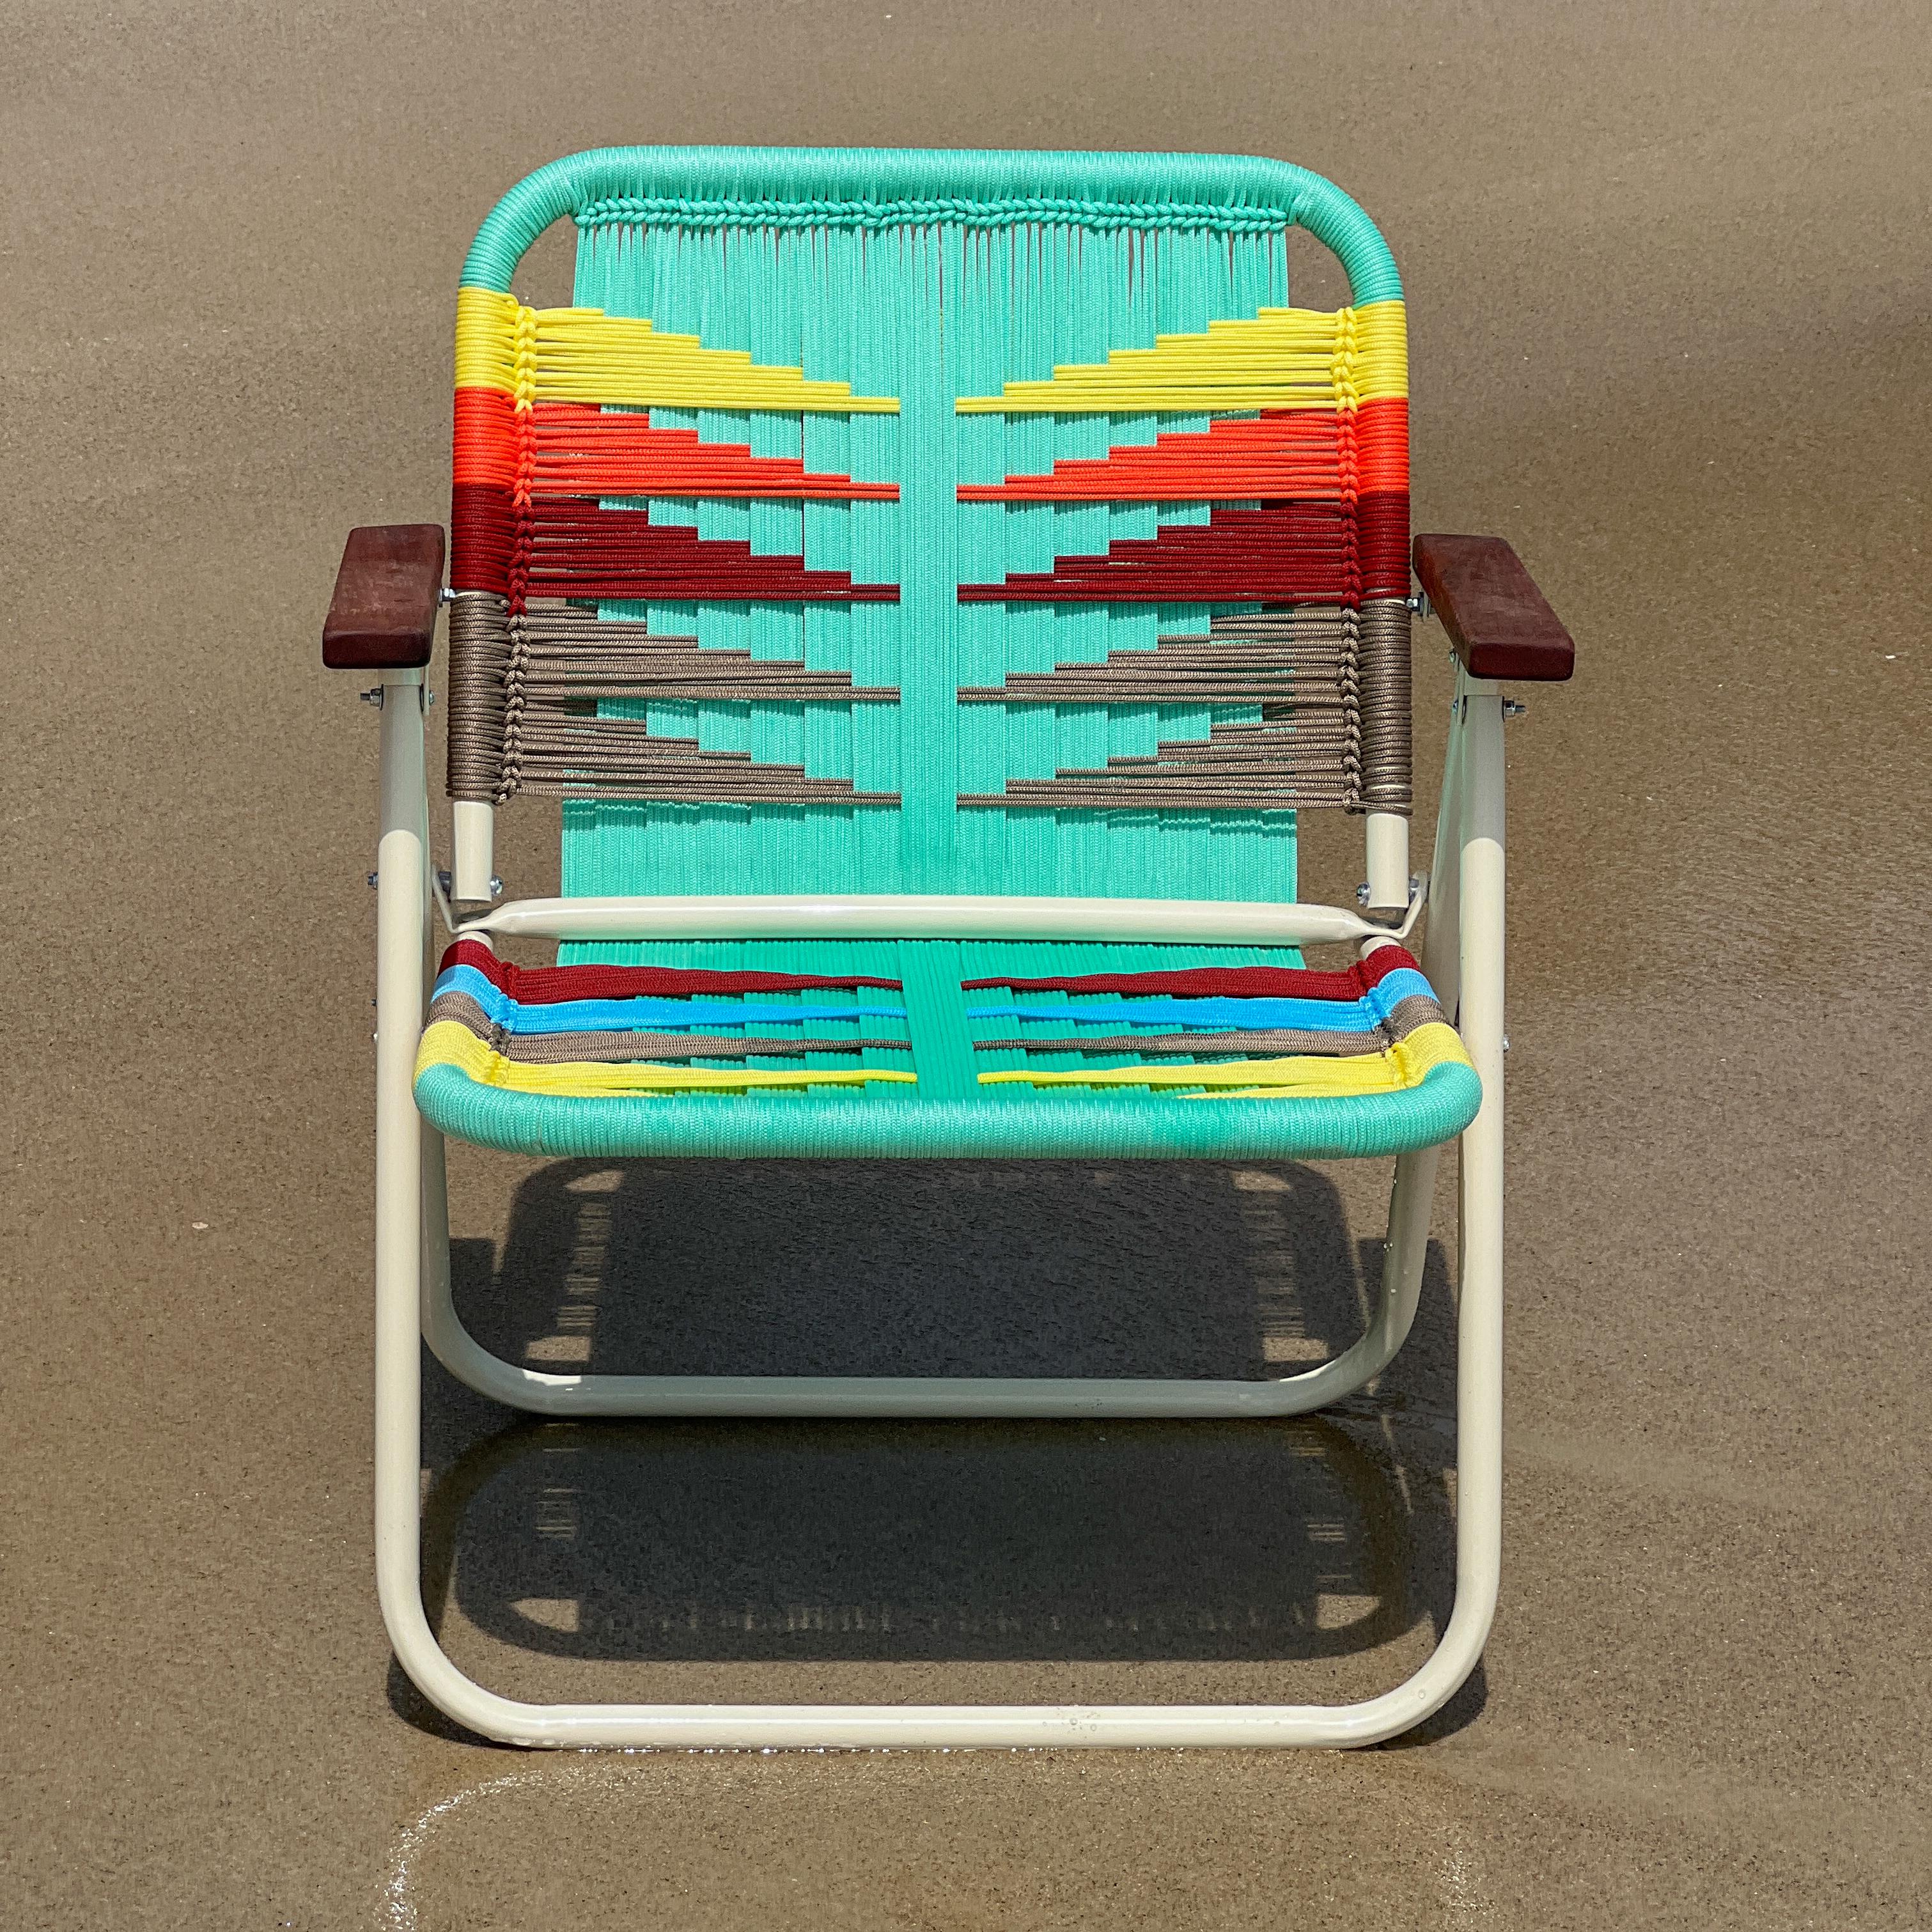 - Trama 5 - main color: baby green - secondary colors: baby yellow, orange, carmin, sepia, baby blue.
- structure color: duna

beach chair, country chair, garden chair, lawn chair, camping chair, folding chair, stylish chair, funky chair,